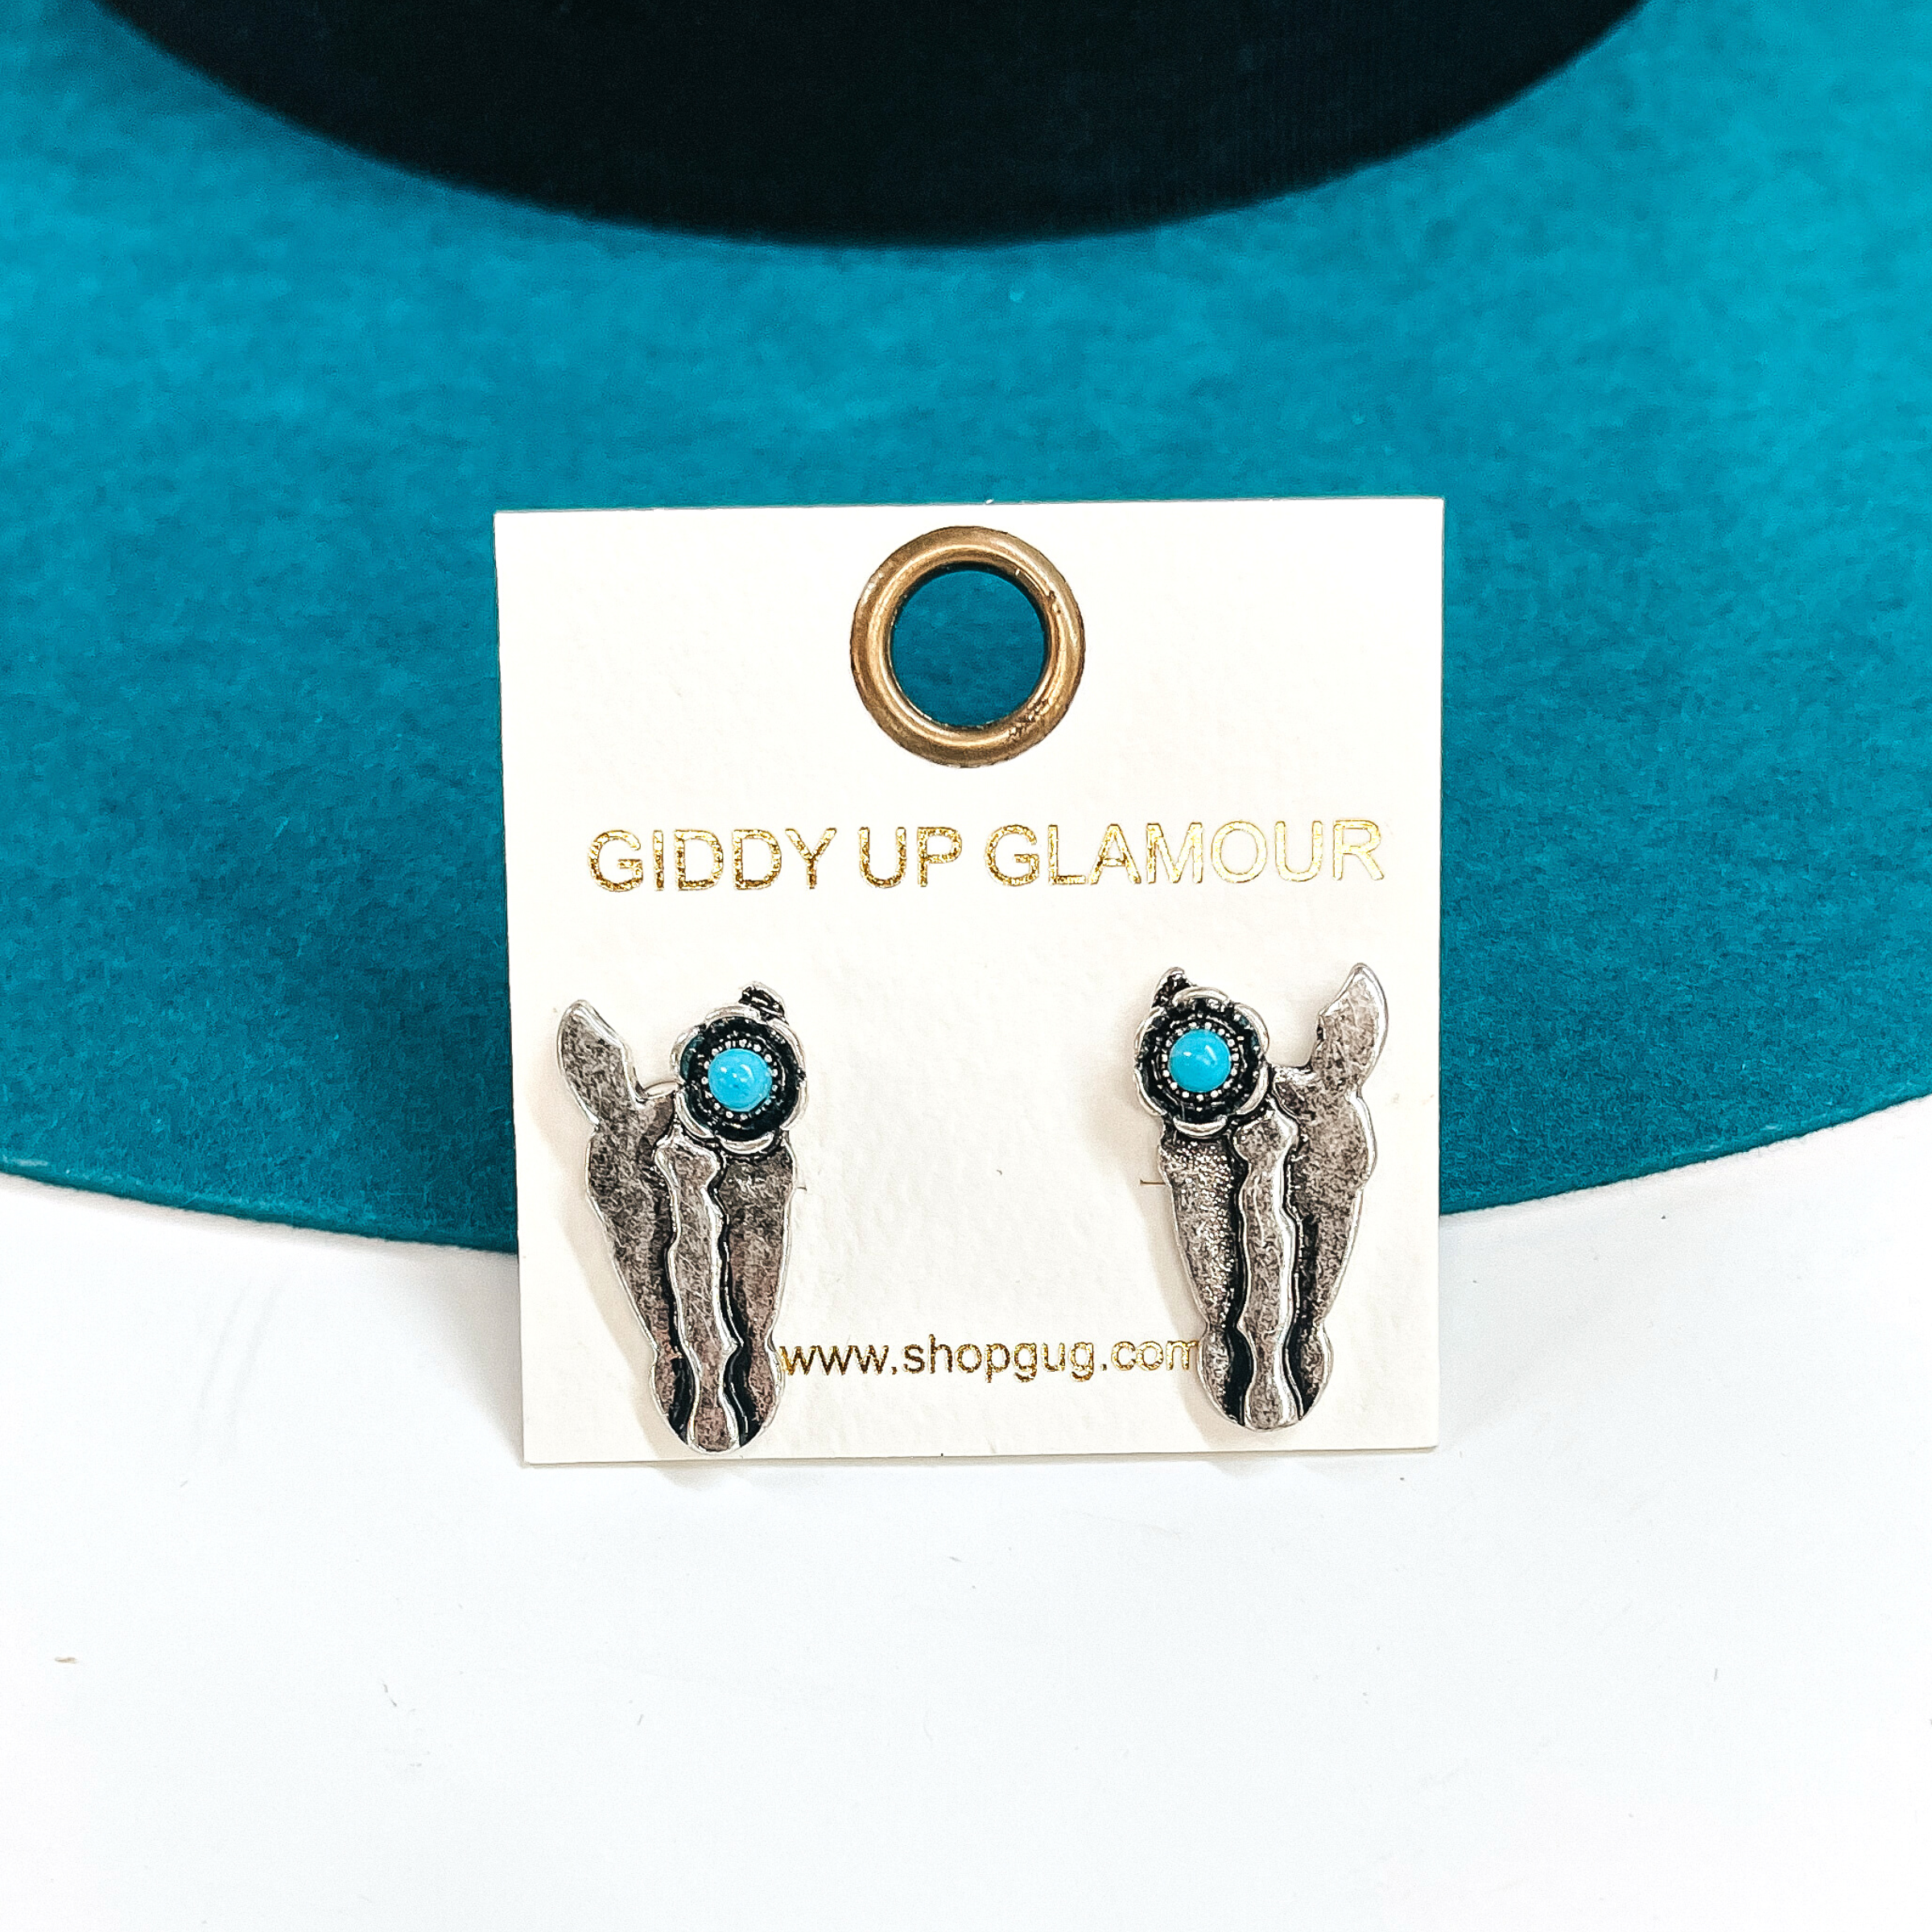 These are silver stud earrings in a horse head shape with a small silver detailed flower  on the ear. The flower has a small fake turquoise stone.  These earrings are taken laying on a teal felt hat and on a white background.